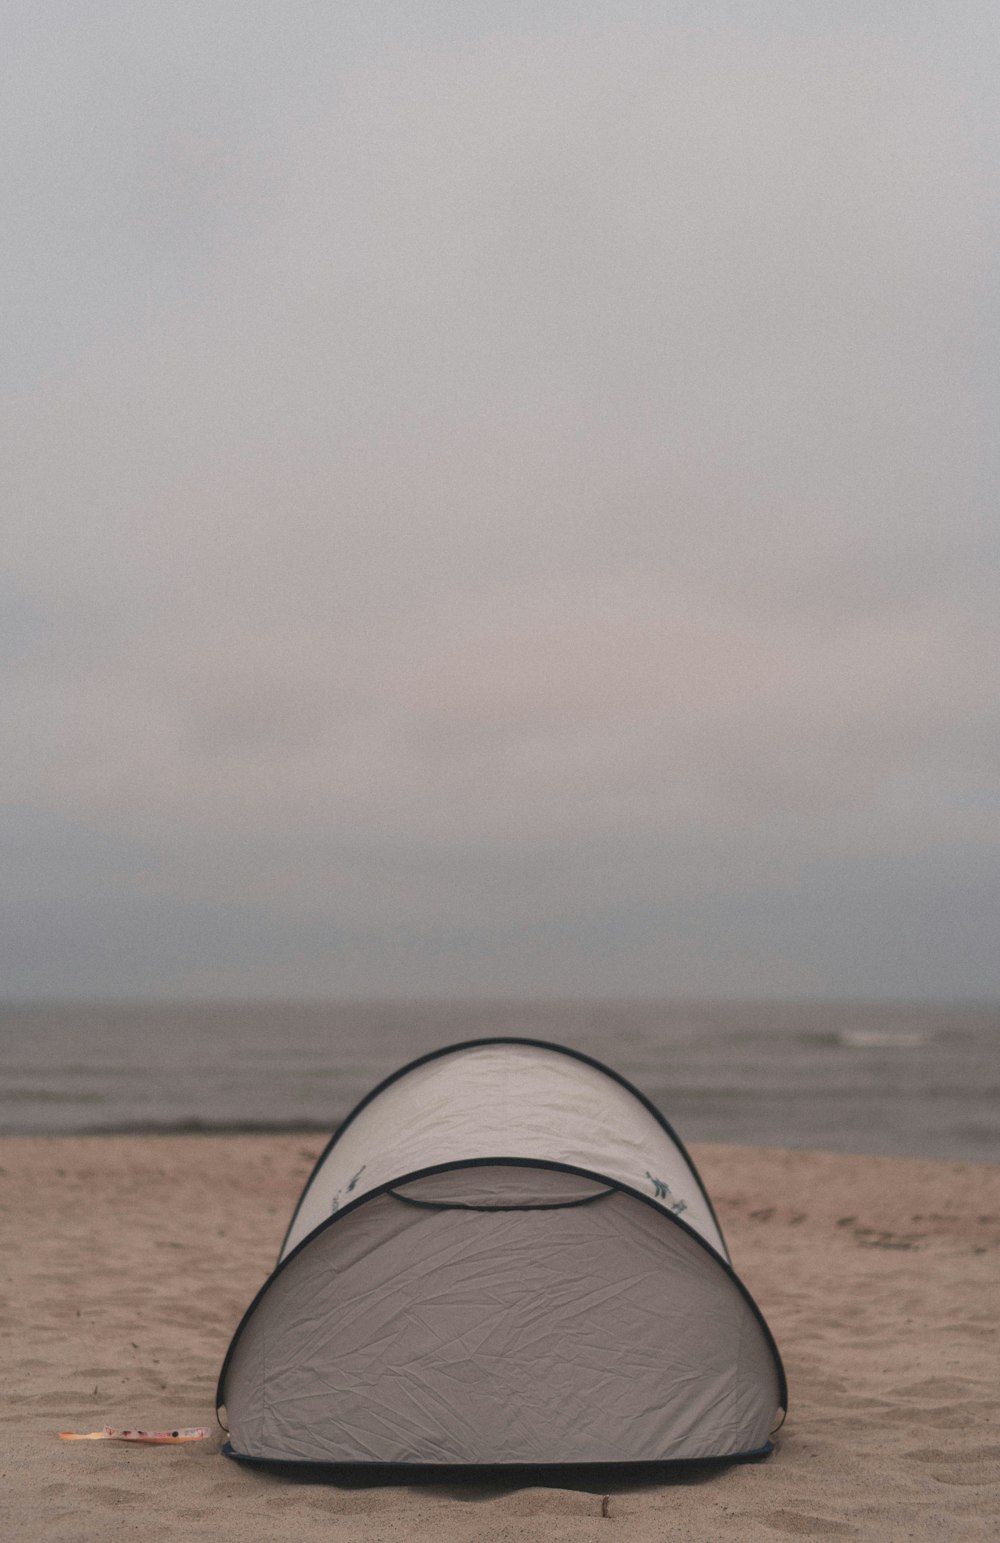 white tent on brown sand near sea during daytime